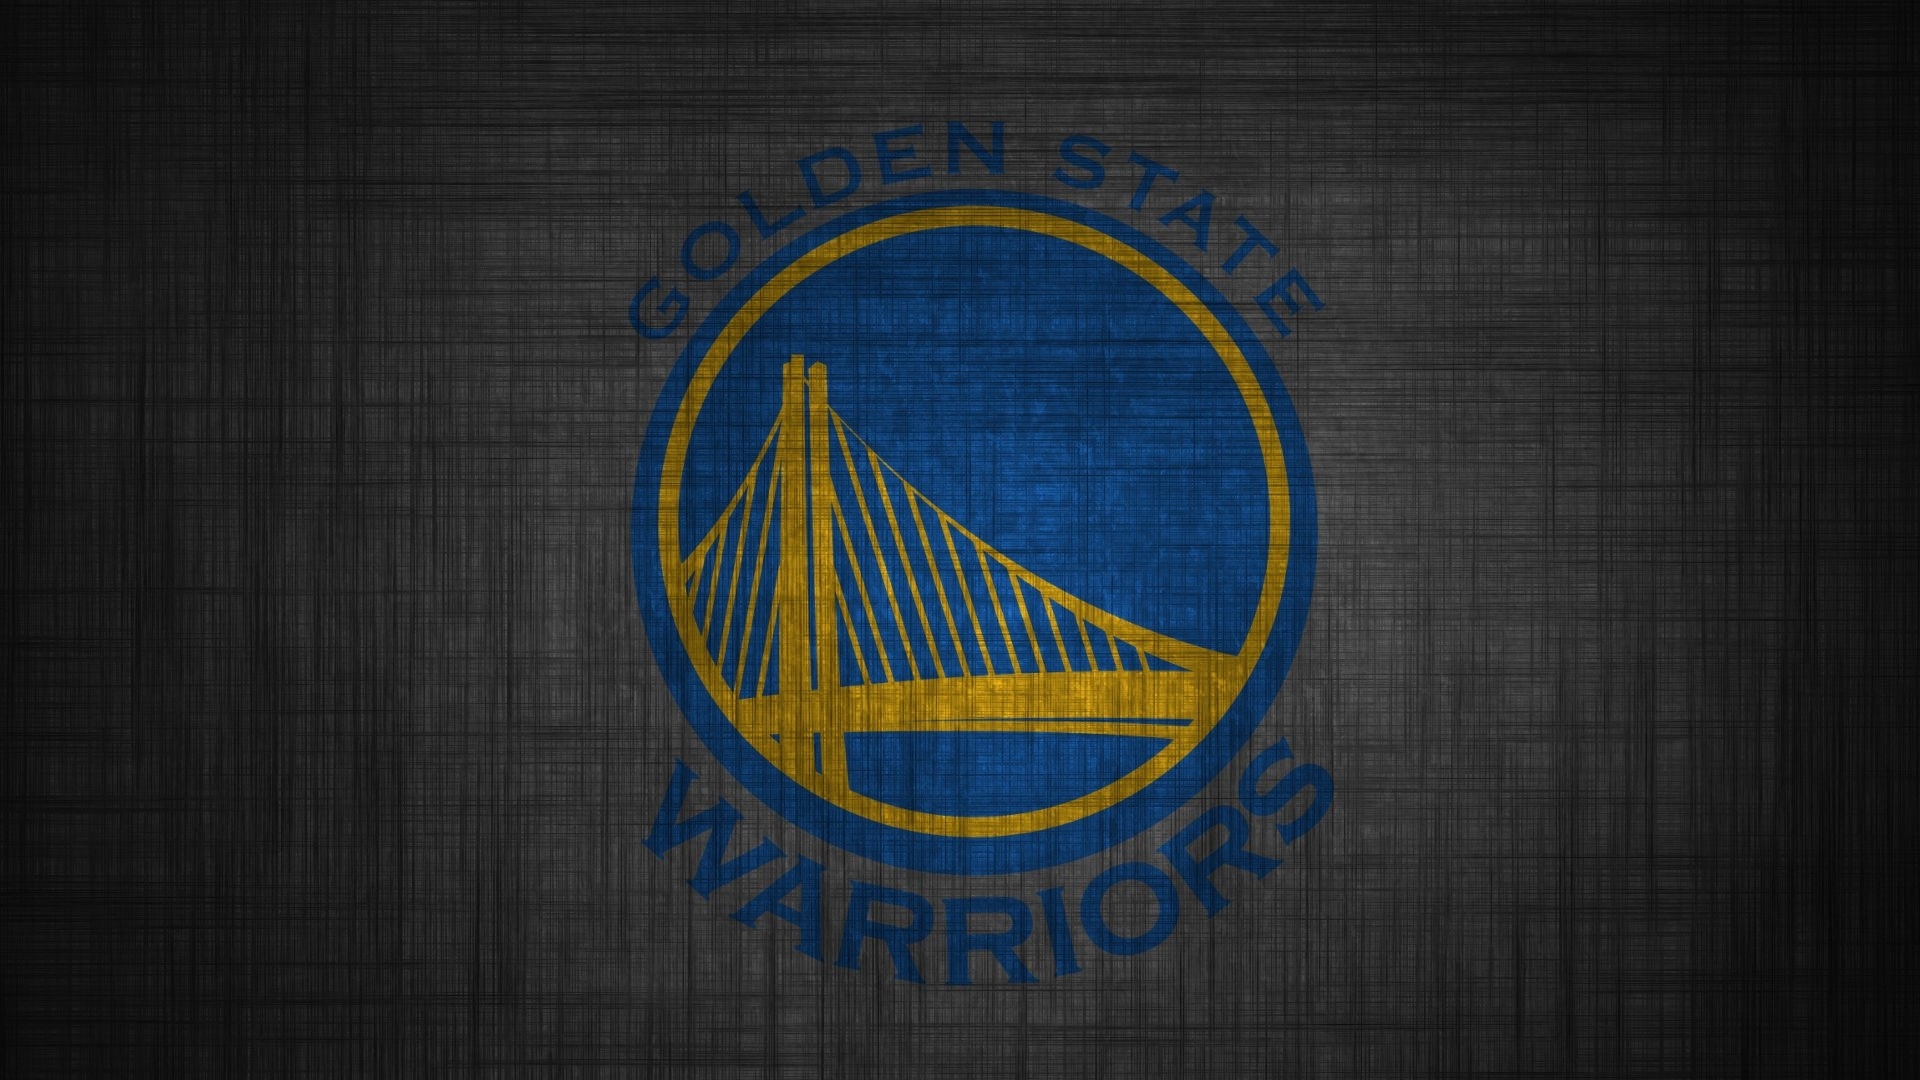 10 New Golden State Warriors Wallpaper 2016 FULL HD 1080p For PC Background